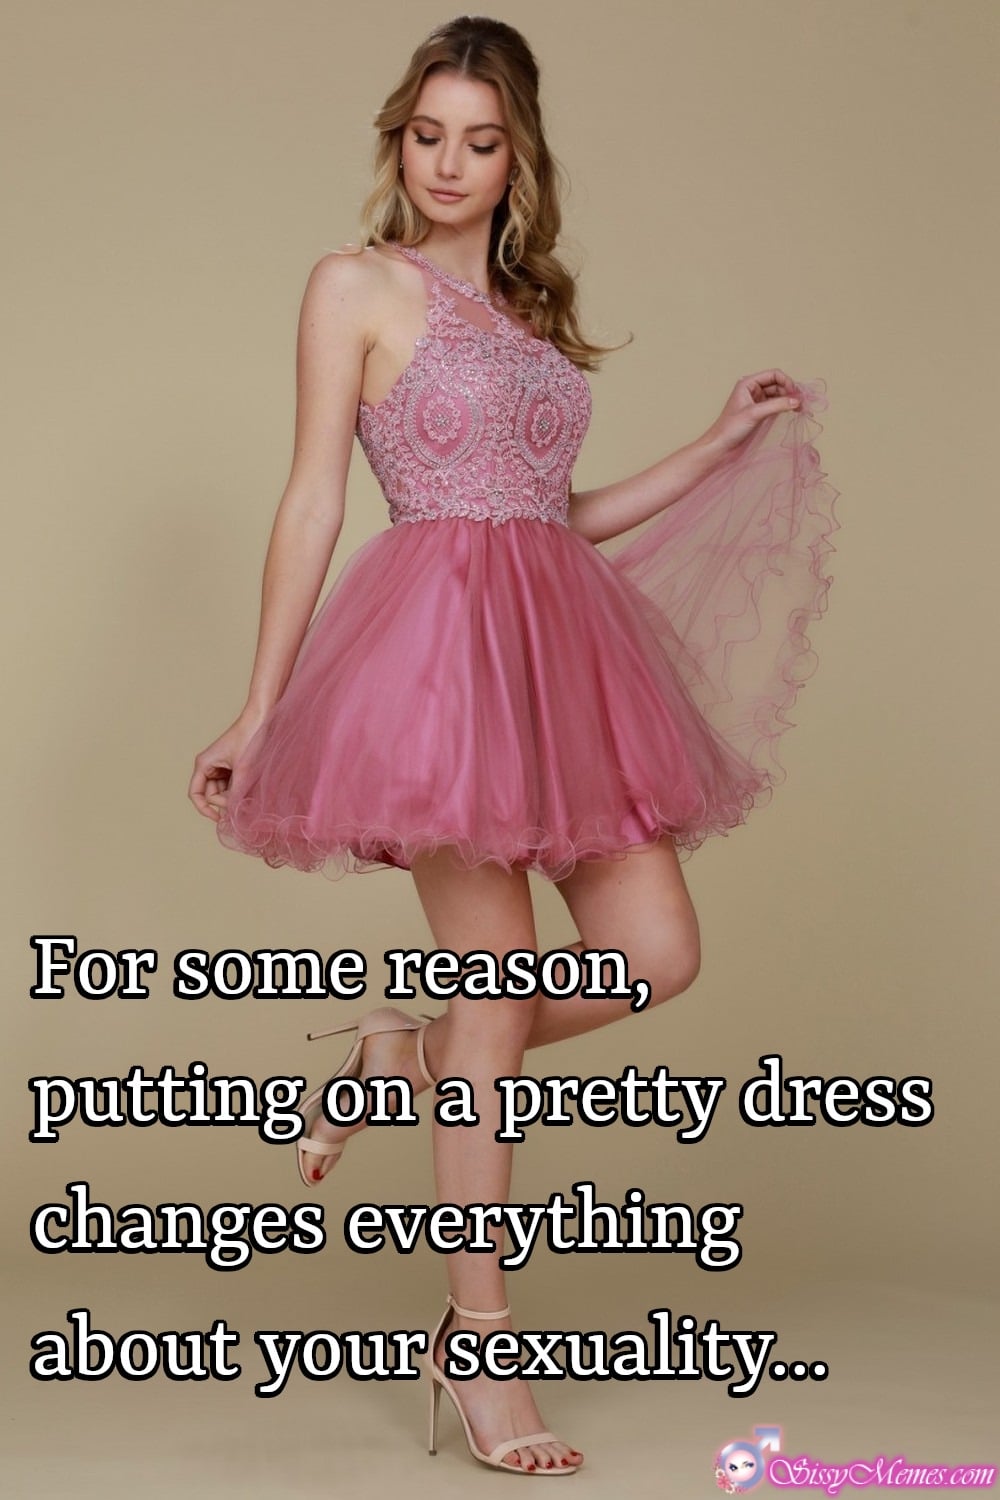 My Favorite Hypno Feminization sissy caption: For some reason, putting on a pretty dress changes everything about your sexuality… Girlyboy Decided to Dressup in Pink Dress